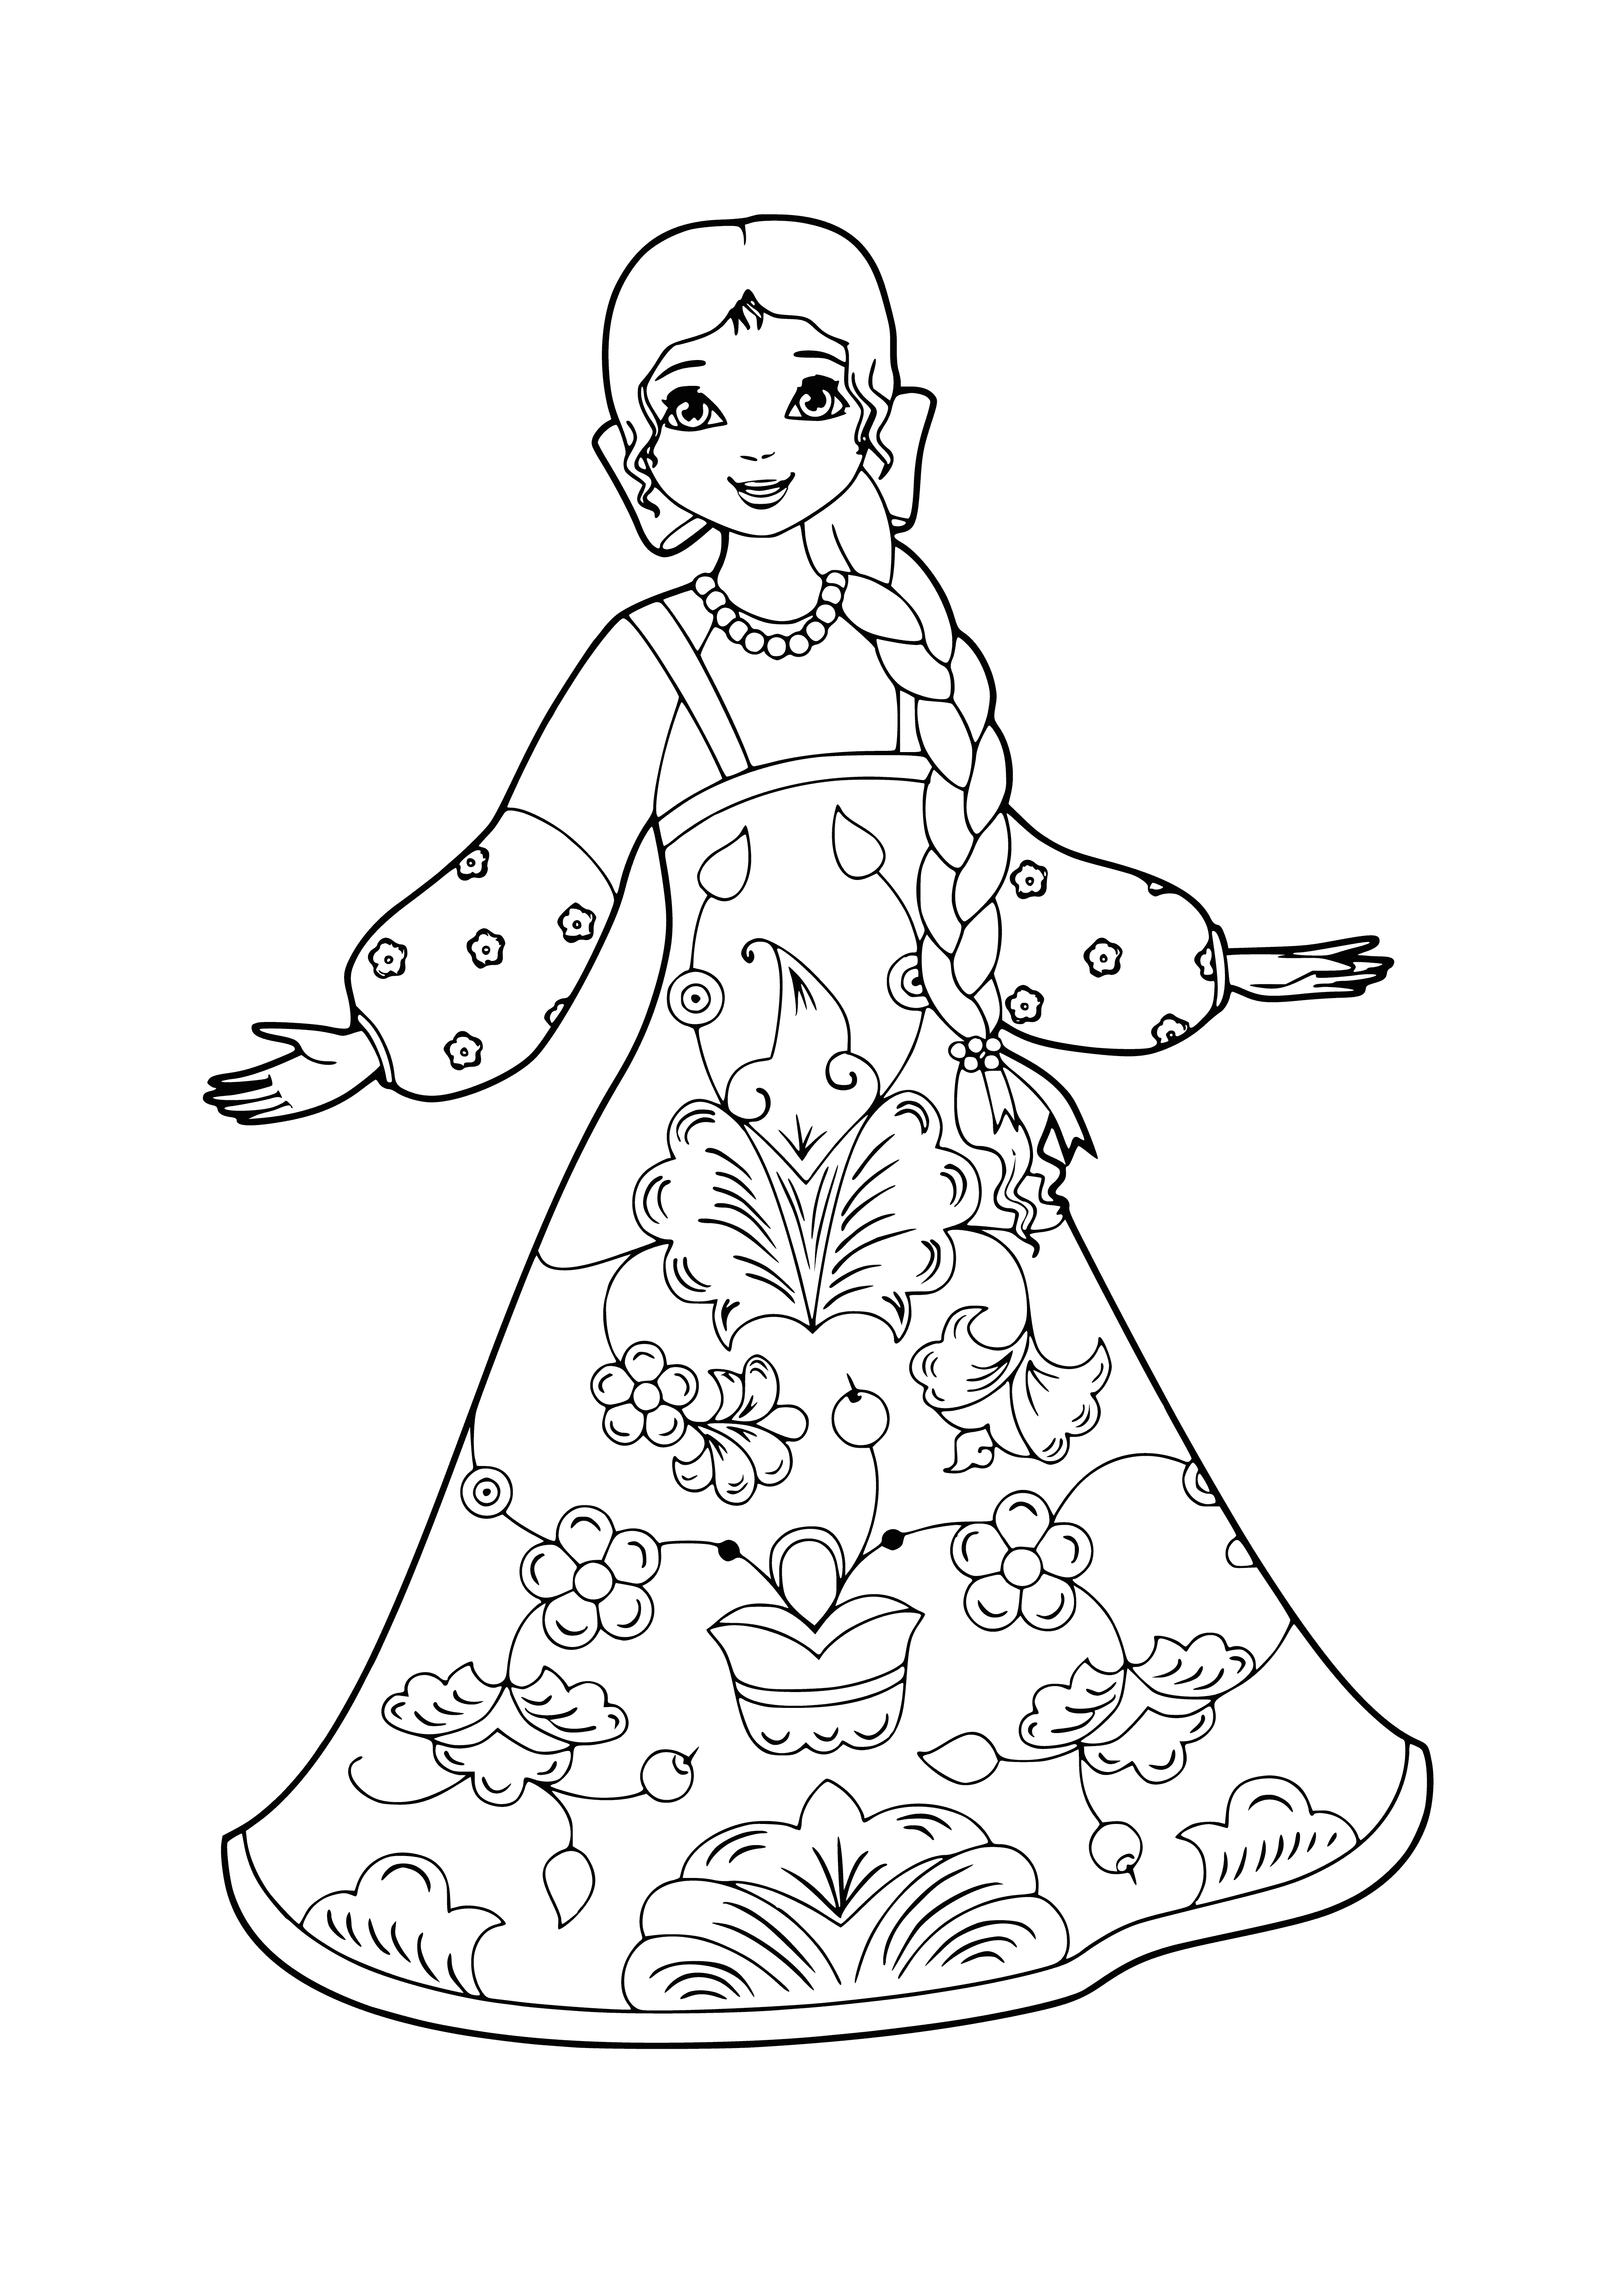 coloring page: A traditional Permogorsk woman and child in brightly-colored outfits, each with a headscarf.